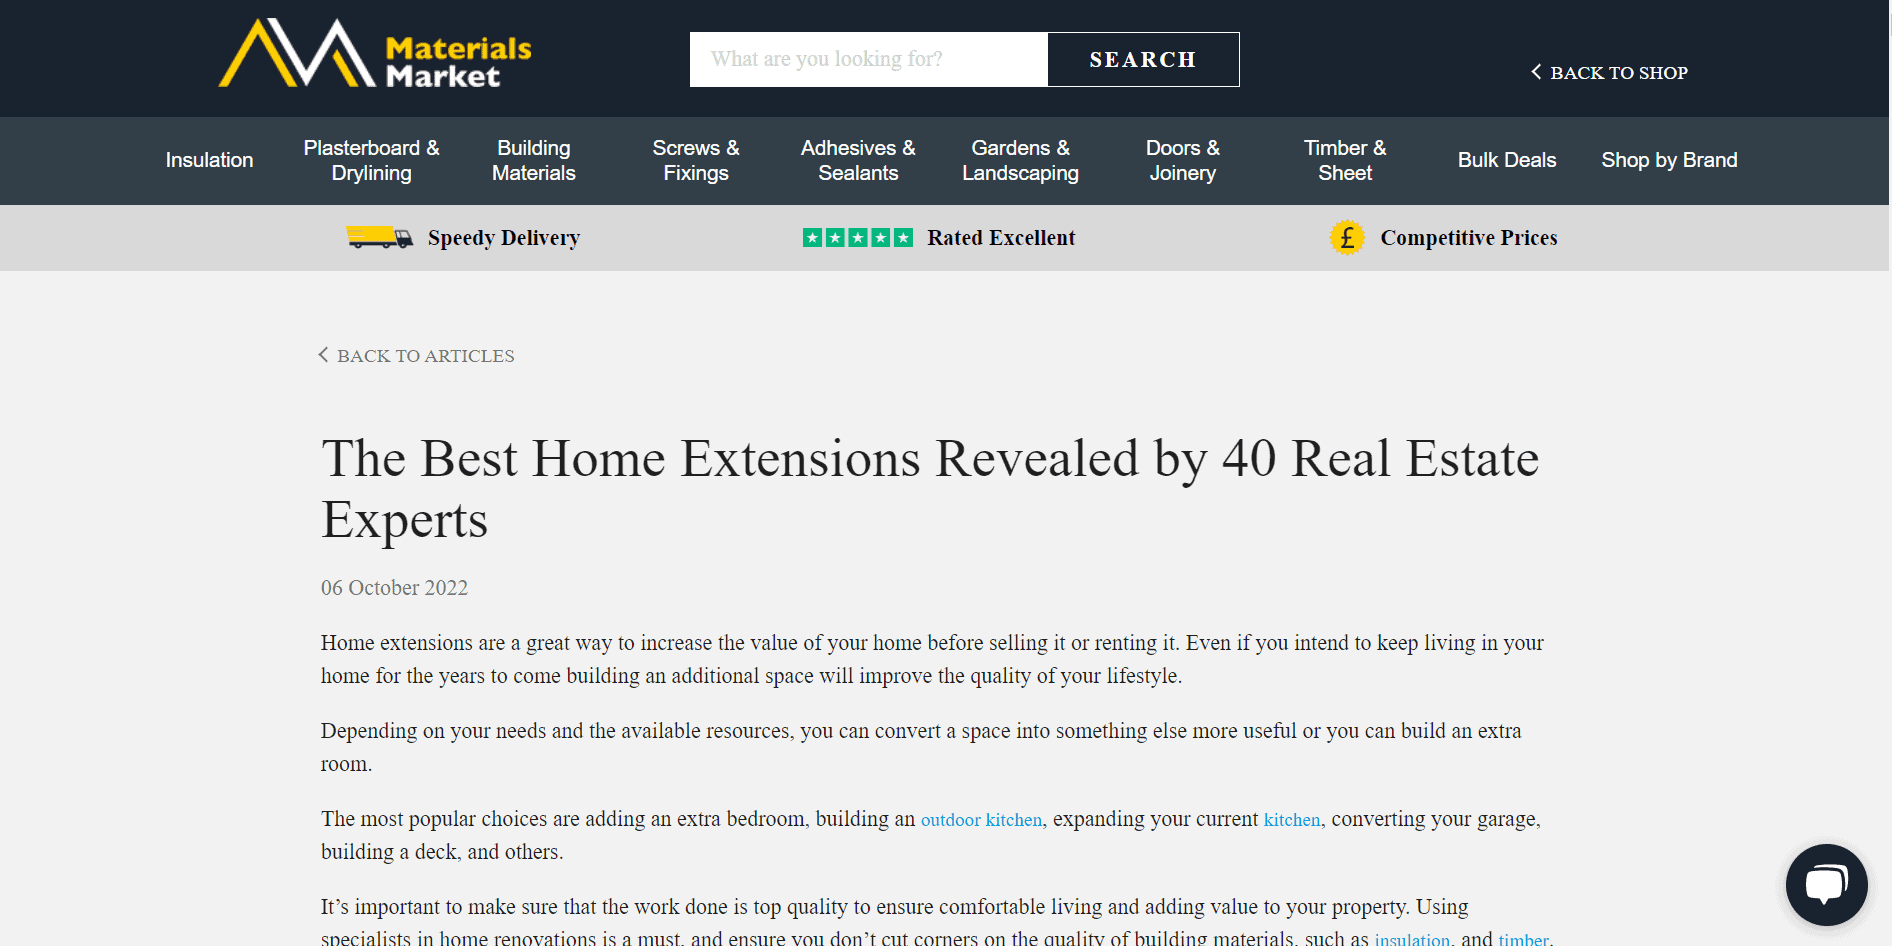 Expert roundup about home extensions